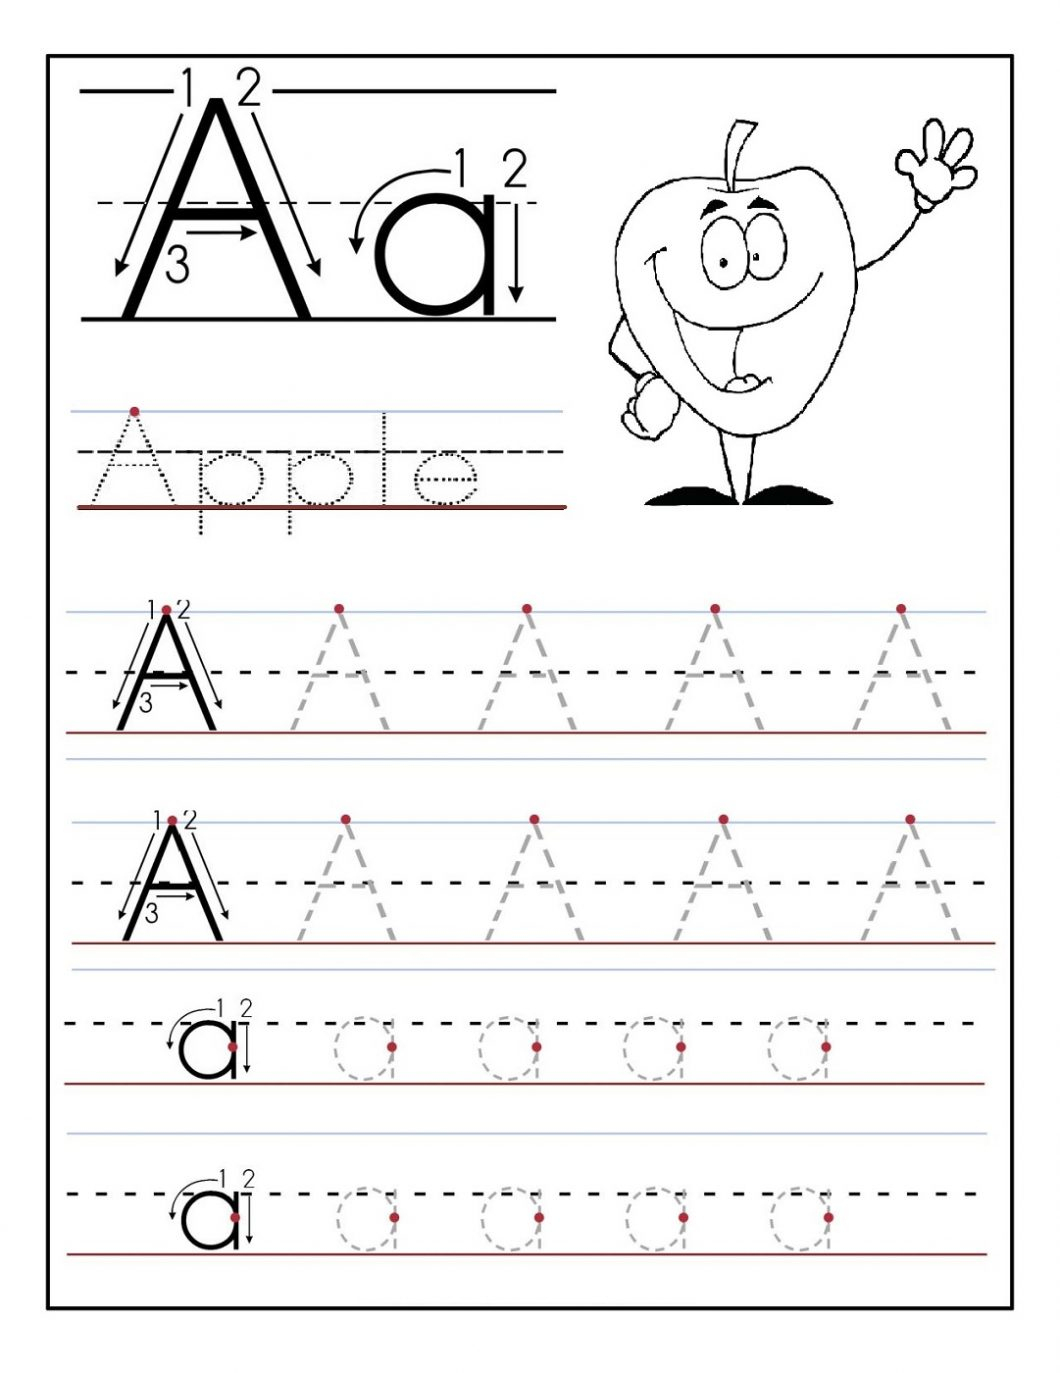 Free Printable Alphabet Worksheets – With Handwriting Exercises Also - Free Printable Letter Writing Worksheets